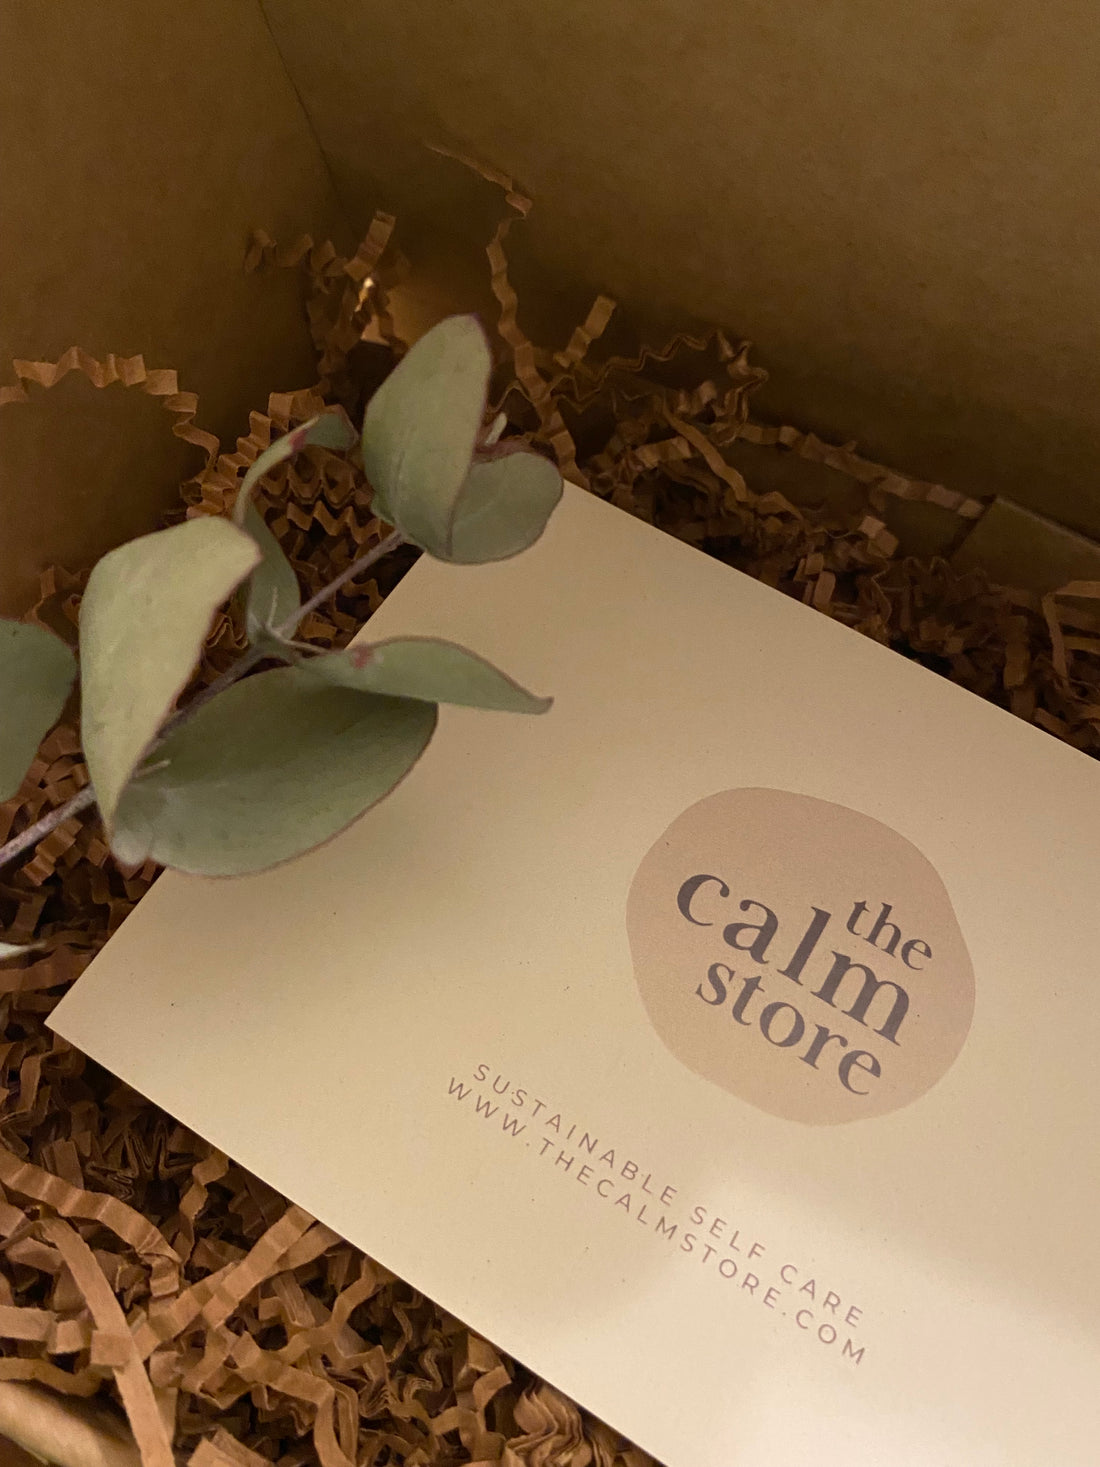 The Calm Store - Why The Calm Store?